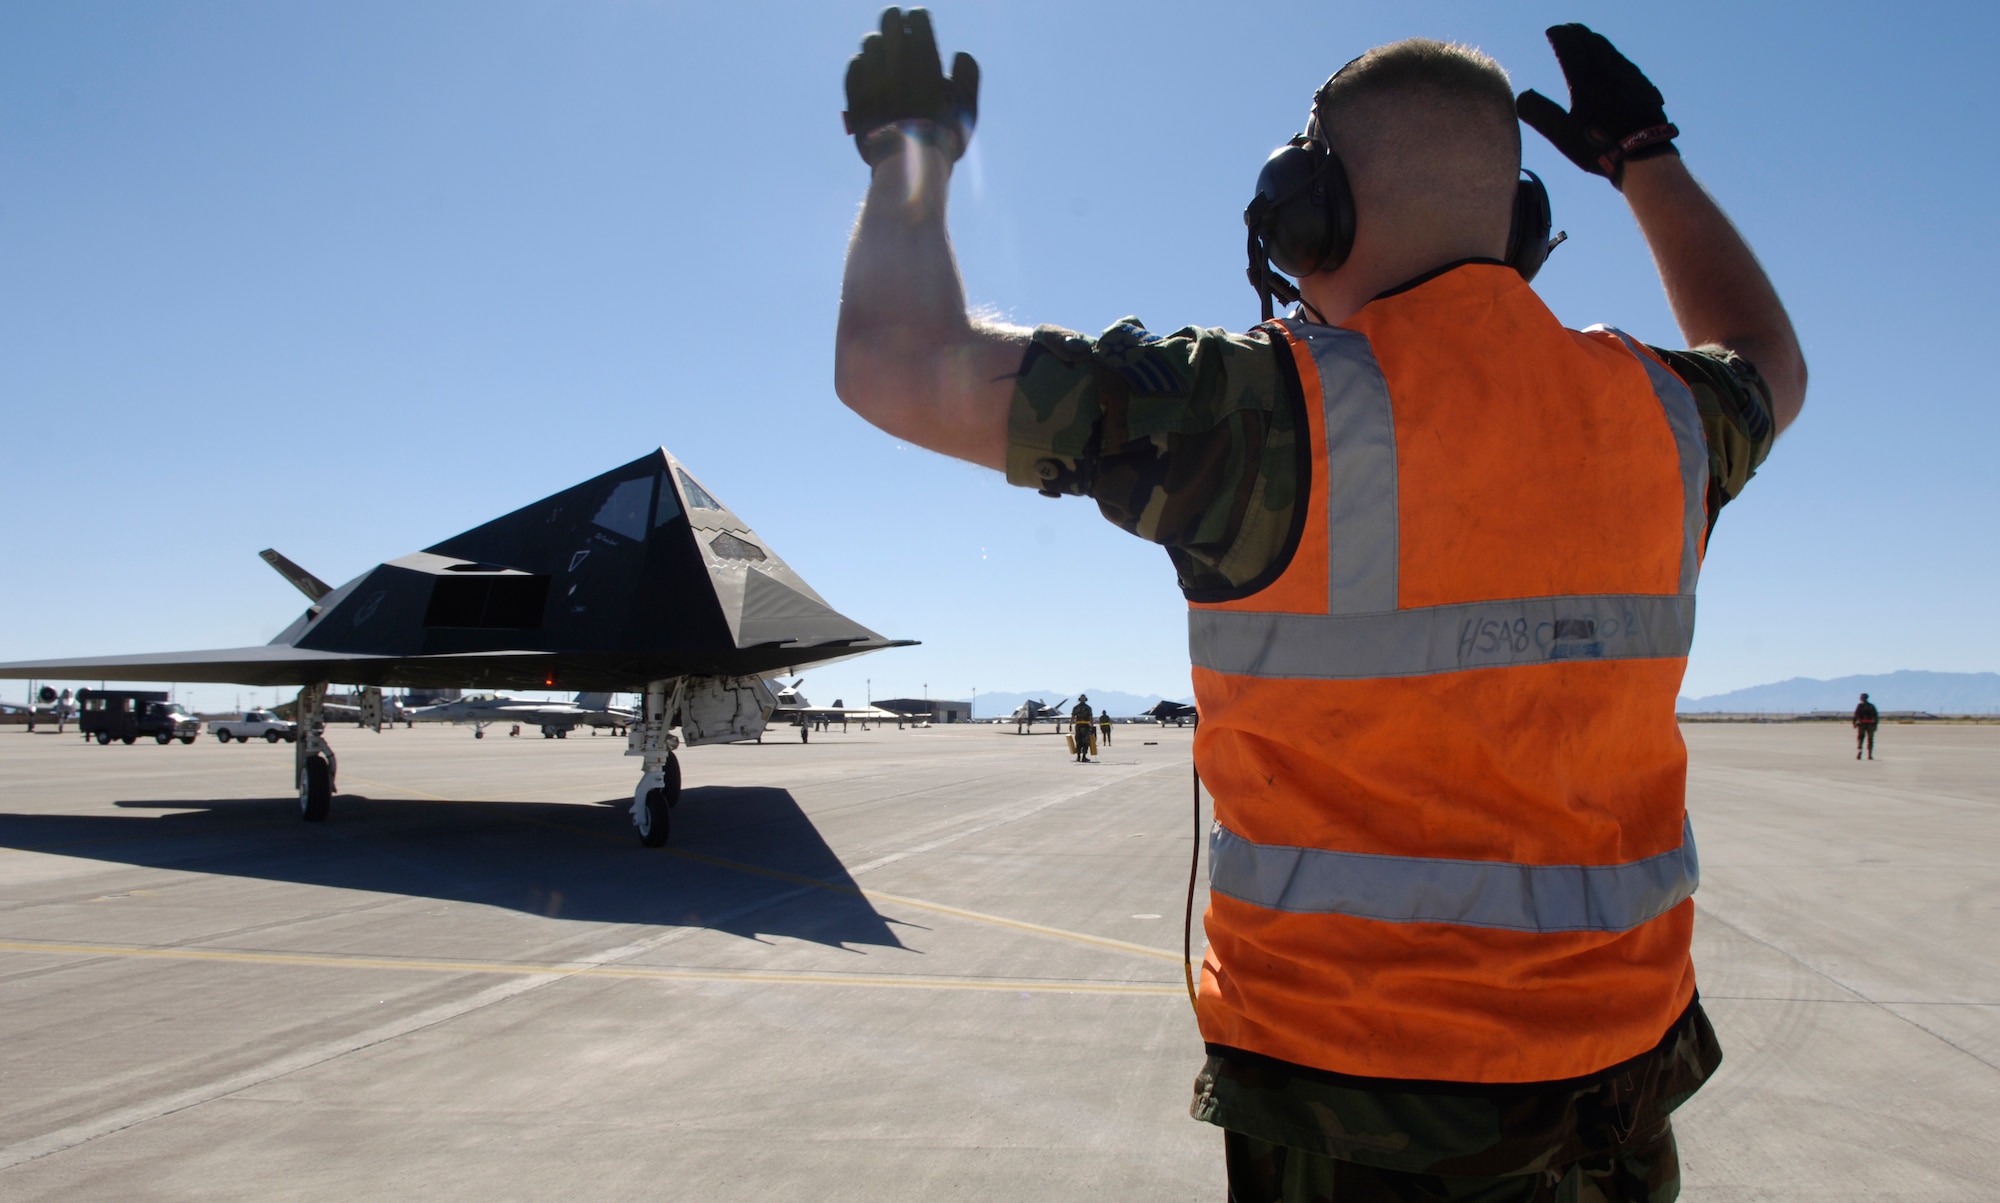 Senior Airman Justin Byars marshals in an F-117 Nighthawk for an end of runway inspection before takeoff from the Holloman Air Force Base N.M. The stealth fighter was one 25 Nighthawks that flew in a formation celebrating the plane's 25th Anniversary. Airman Byars is a crew chief with the 49th Aircraft Maintenance Squadron. (U.S. Air Force photo/Senior Airman Brian Ferguson)